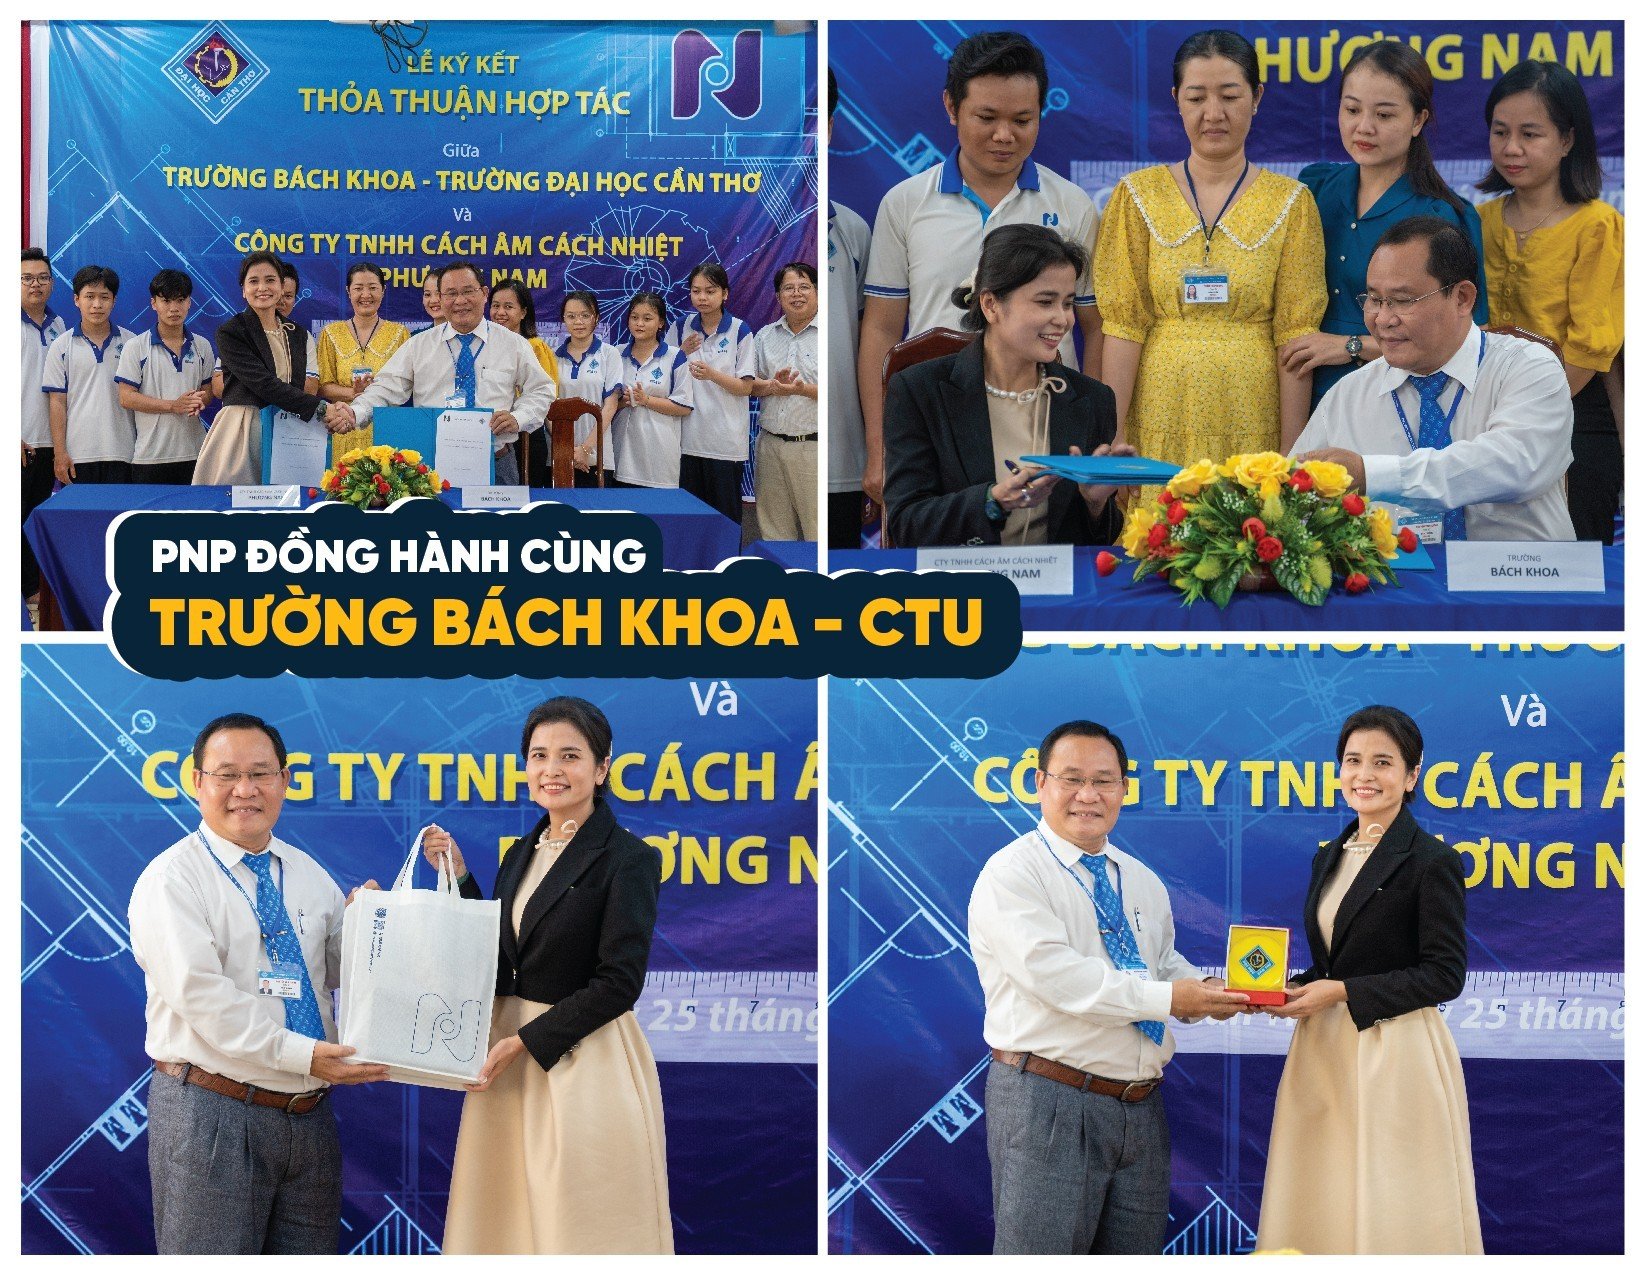 SIGNING CEREMONY OF COOPERATION BETWEEN PHUONG NAM PANEL AND SCHOOL OF TECHNOLOGY – CAN THO UNIVERSITY